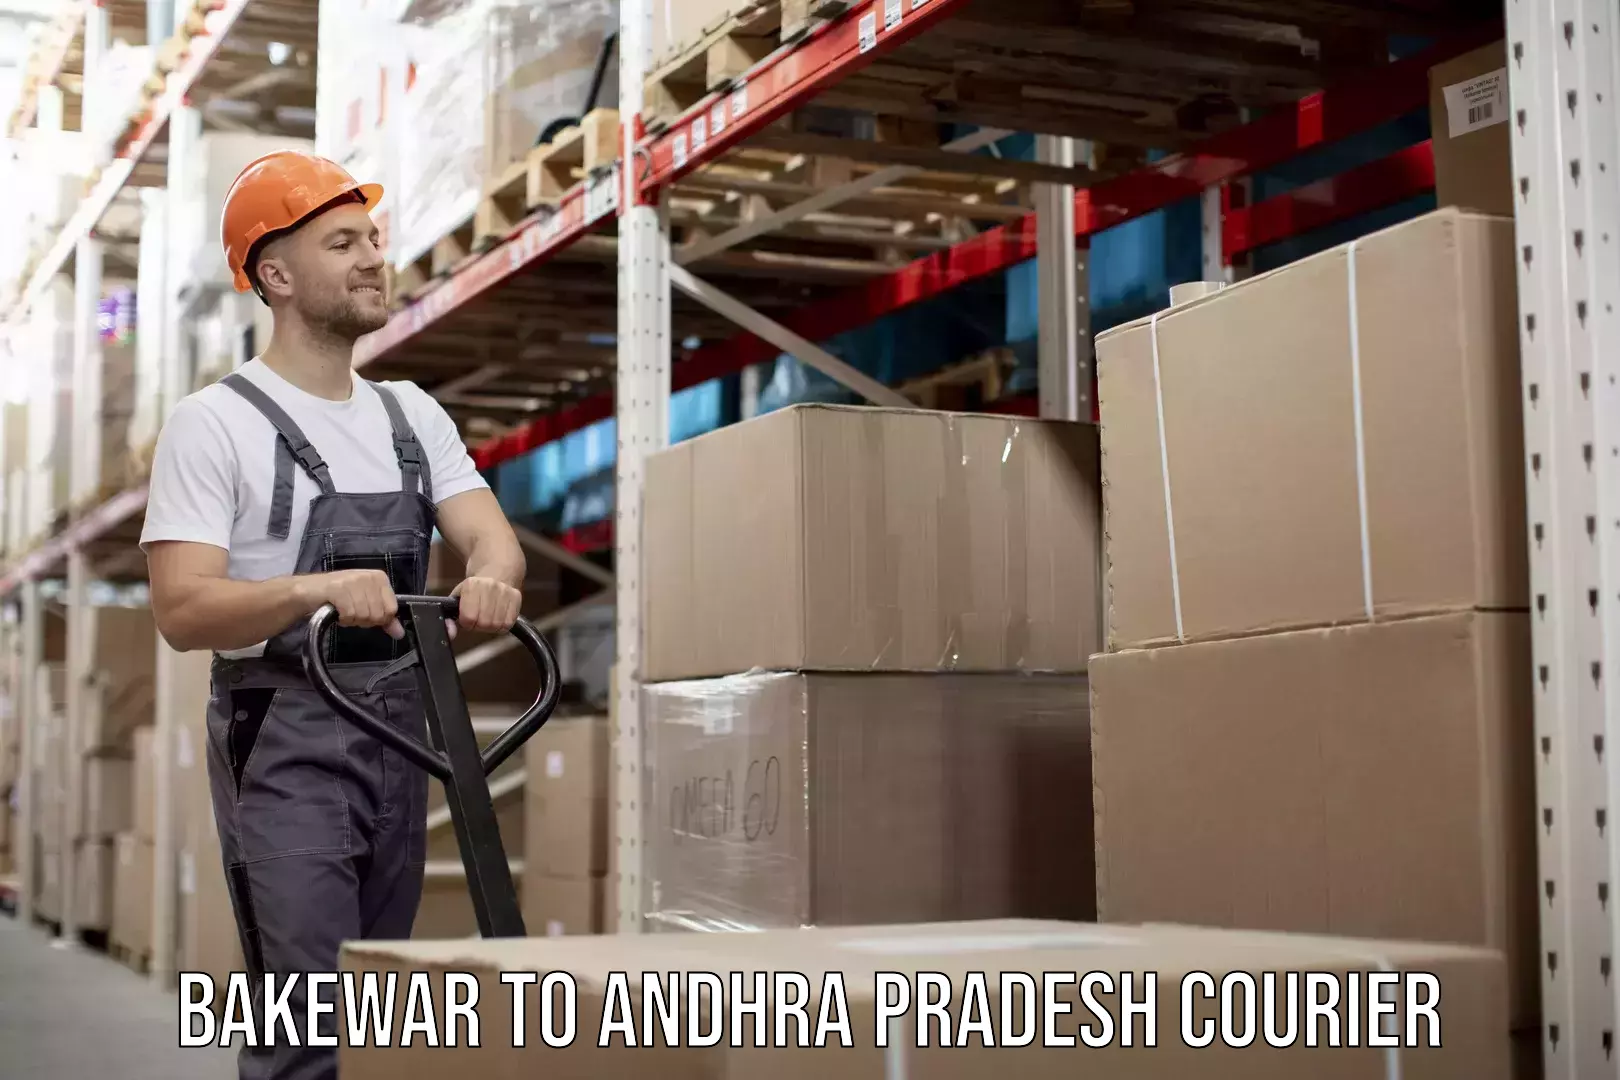 Quality courier services Bakewar to Andhra Pradesh